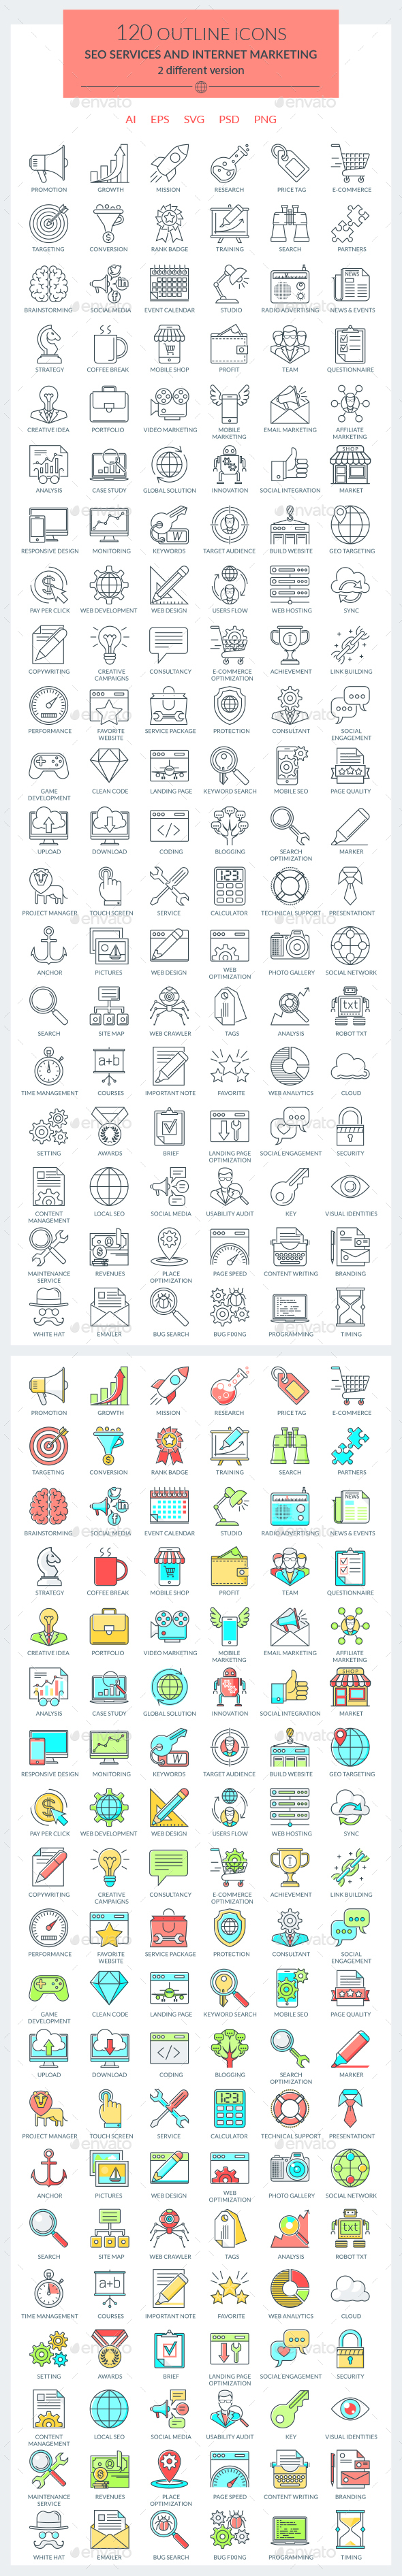 SEO Services and Internet Marketing Icons